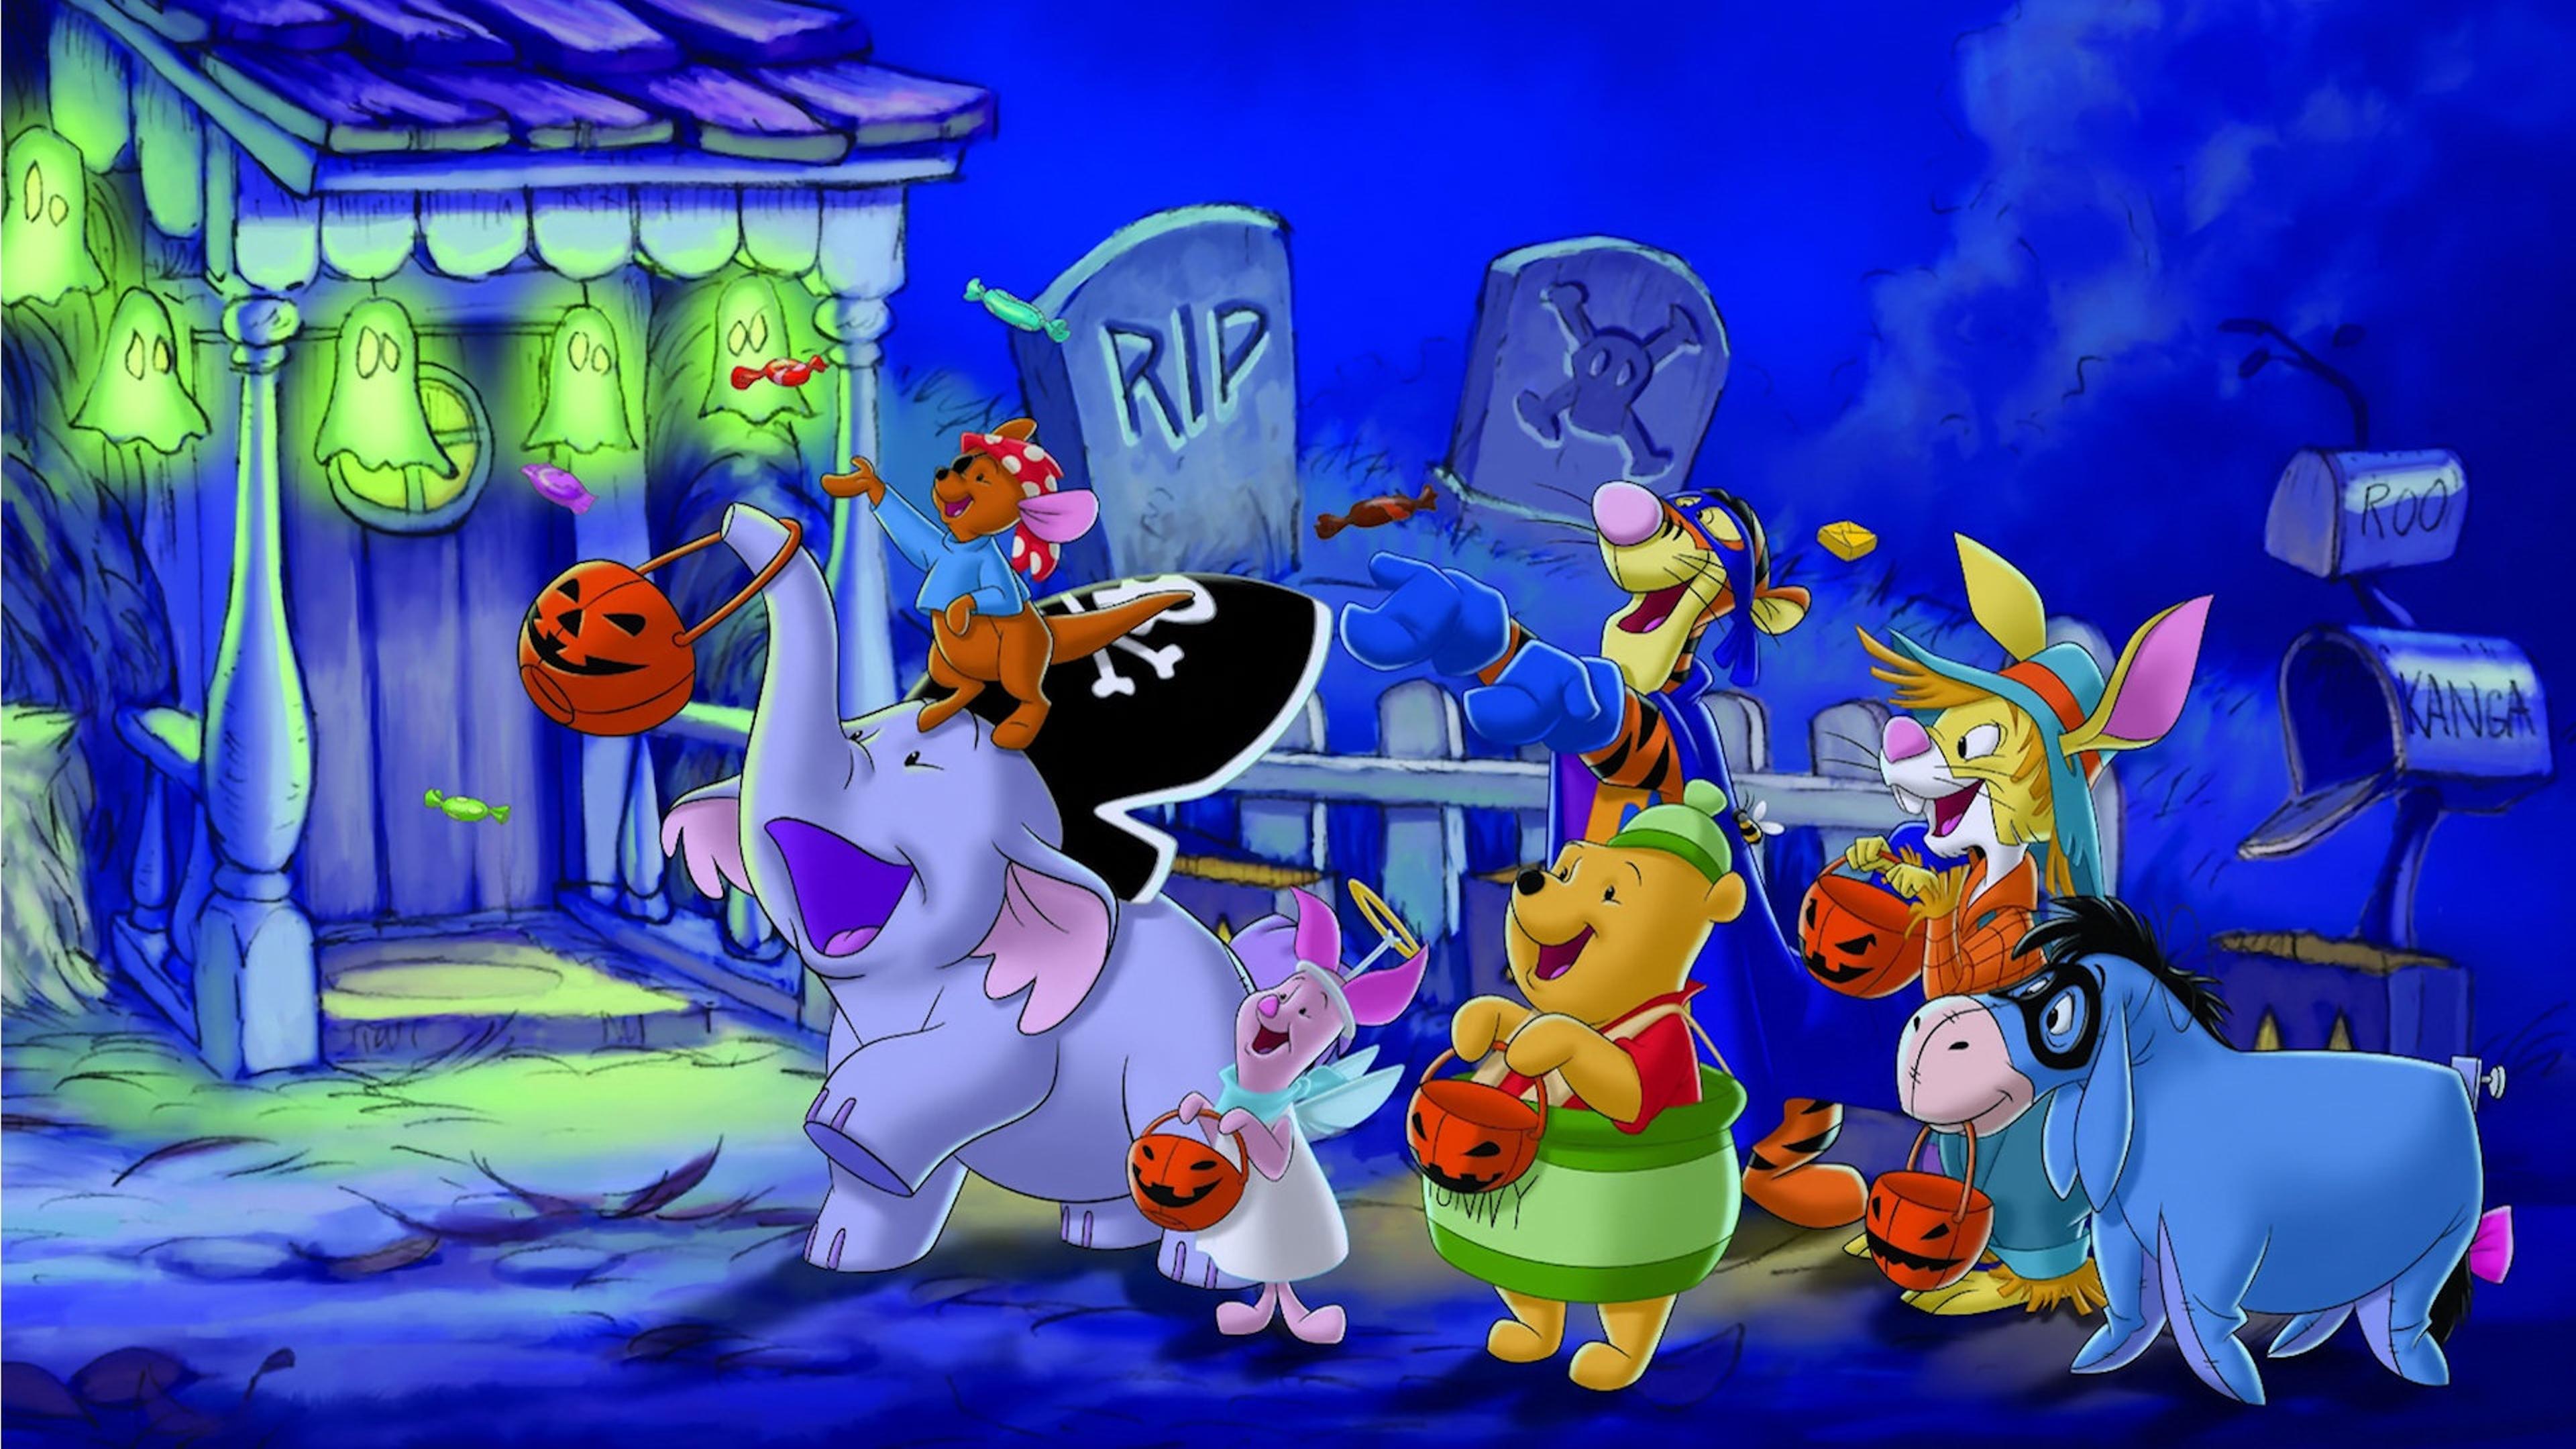 Funny animals from cartoons in the Halloween night